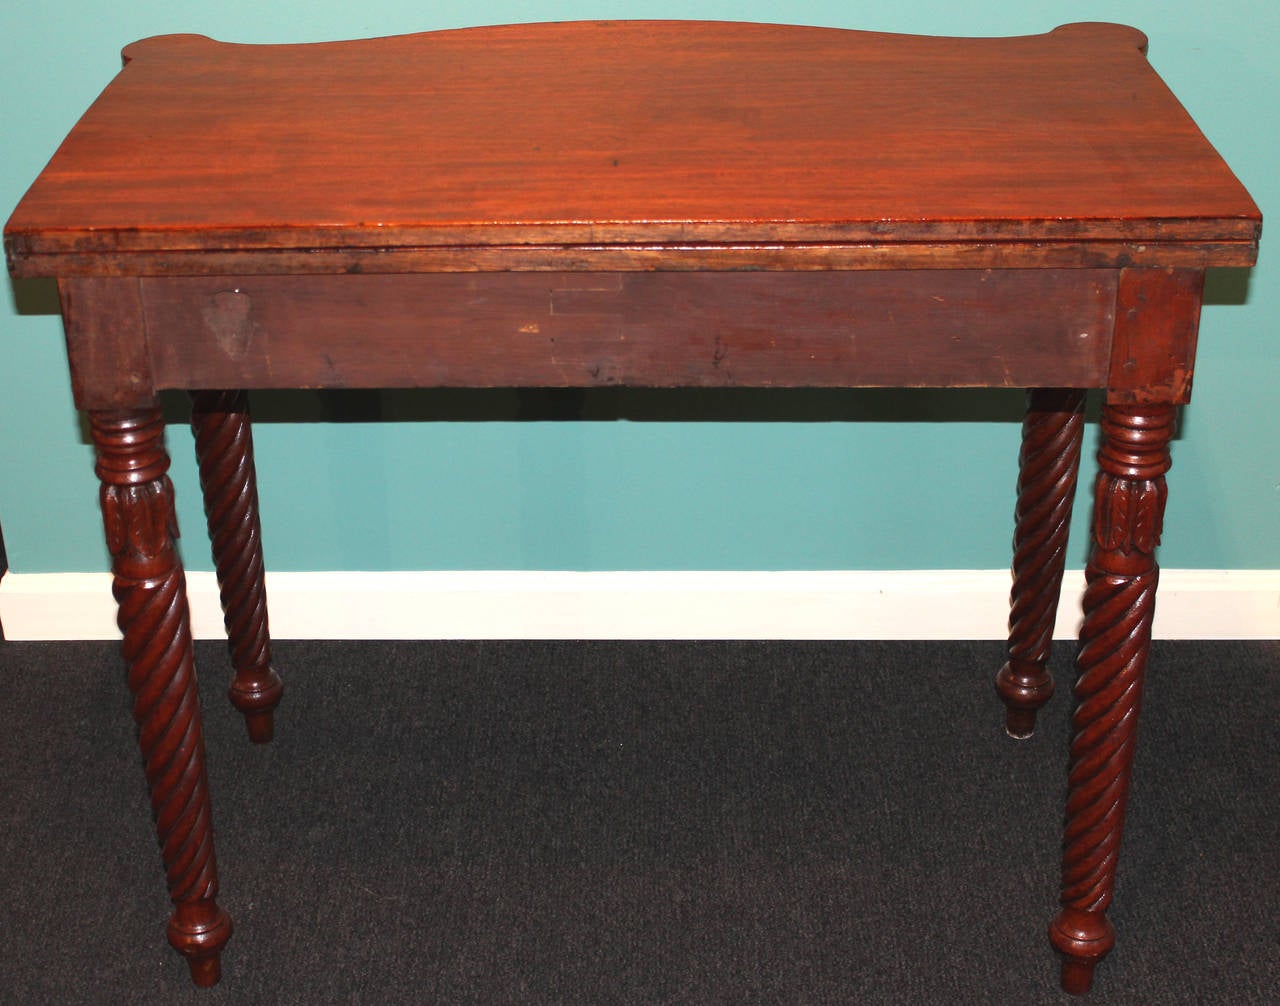 Federal Period , Sheraton Card Table from Salem, Massachusetts 4